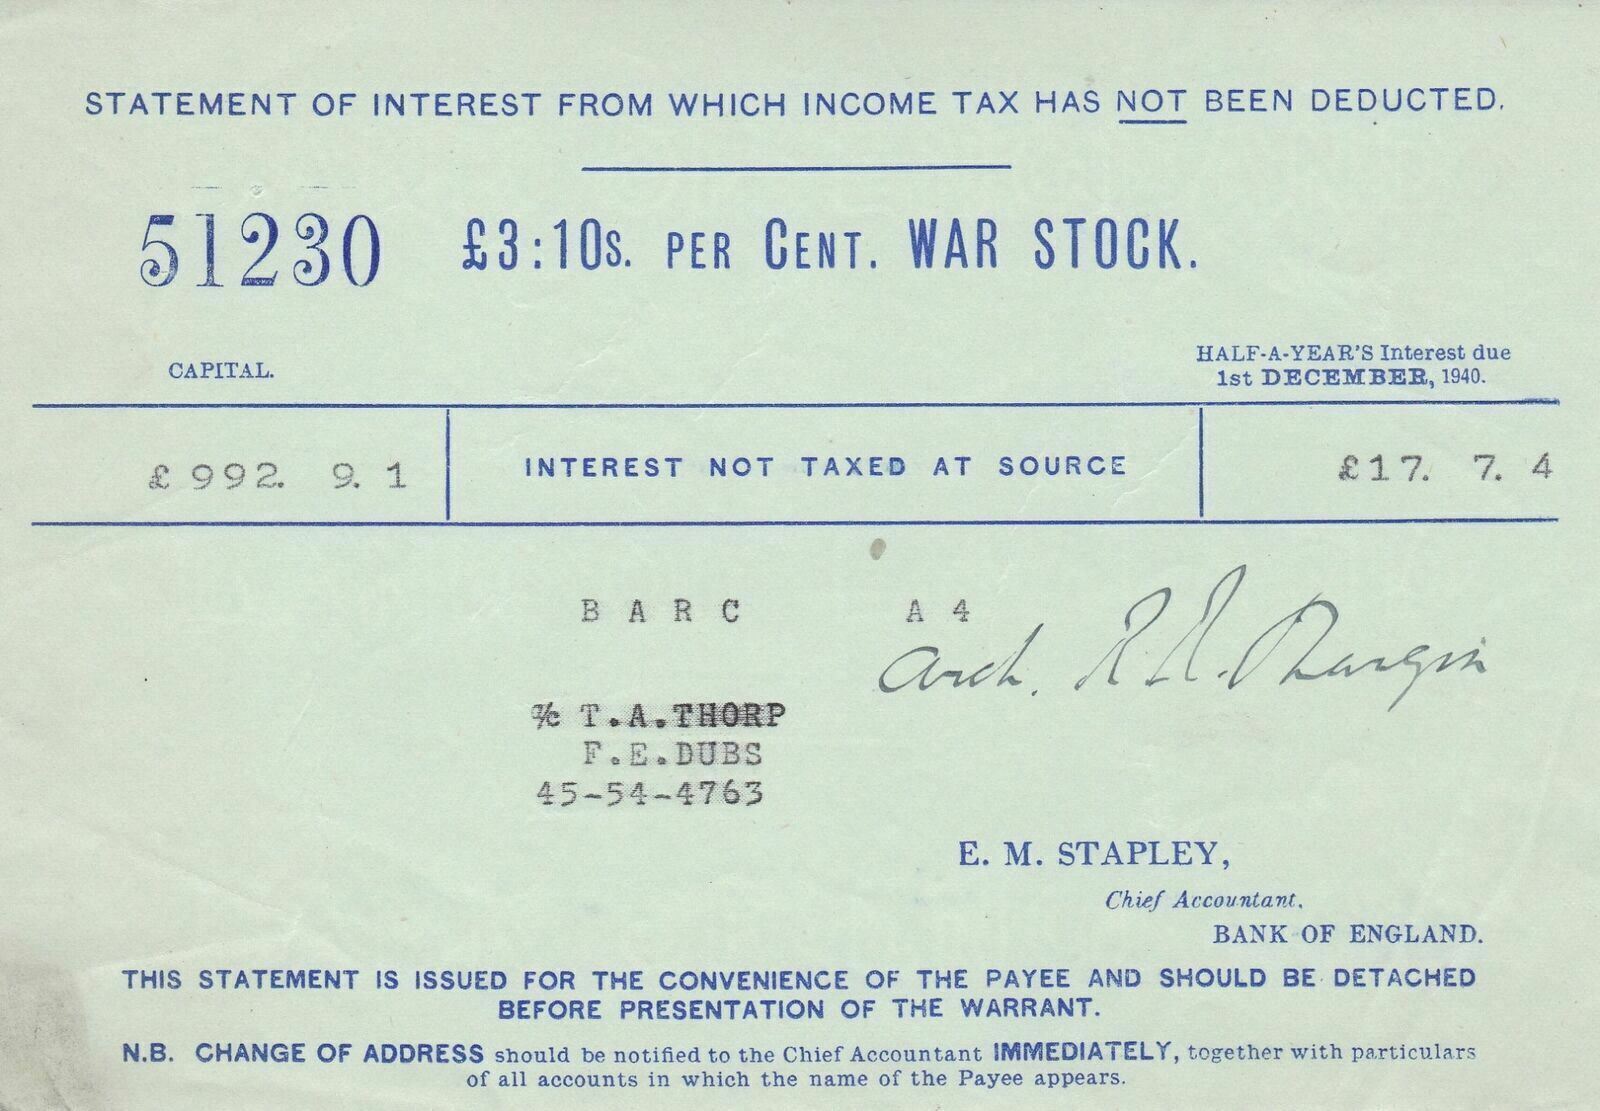 STOCK 1940 Half Years Interest Tax Not Deducted Statement Ref 48736